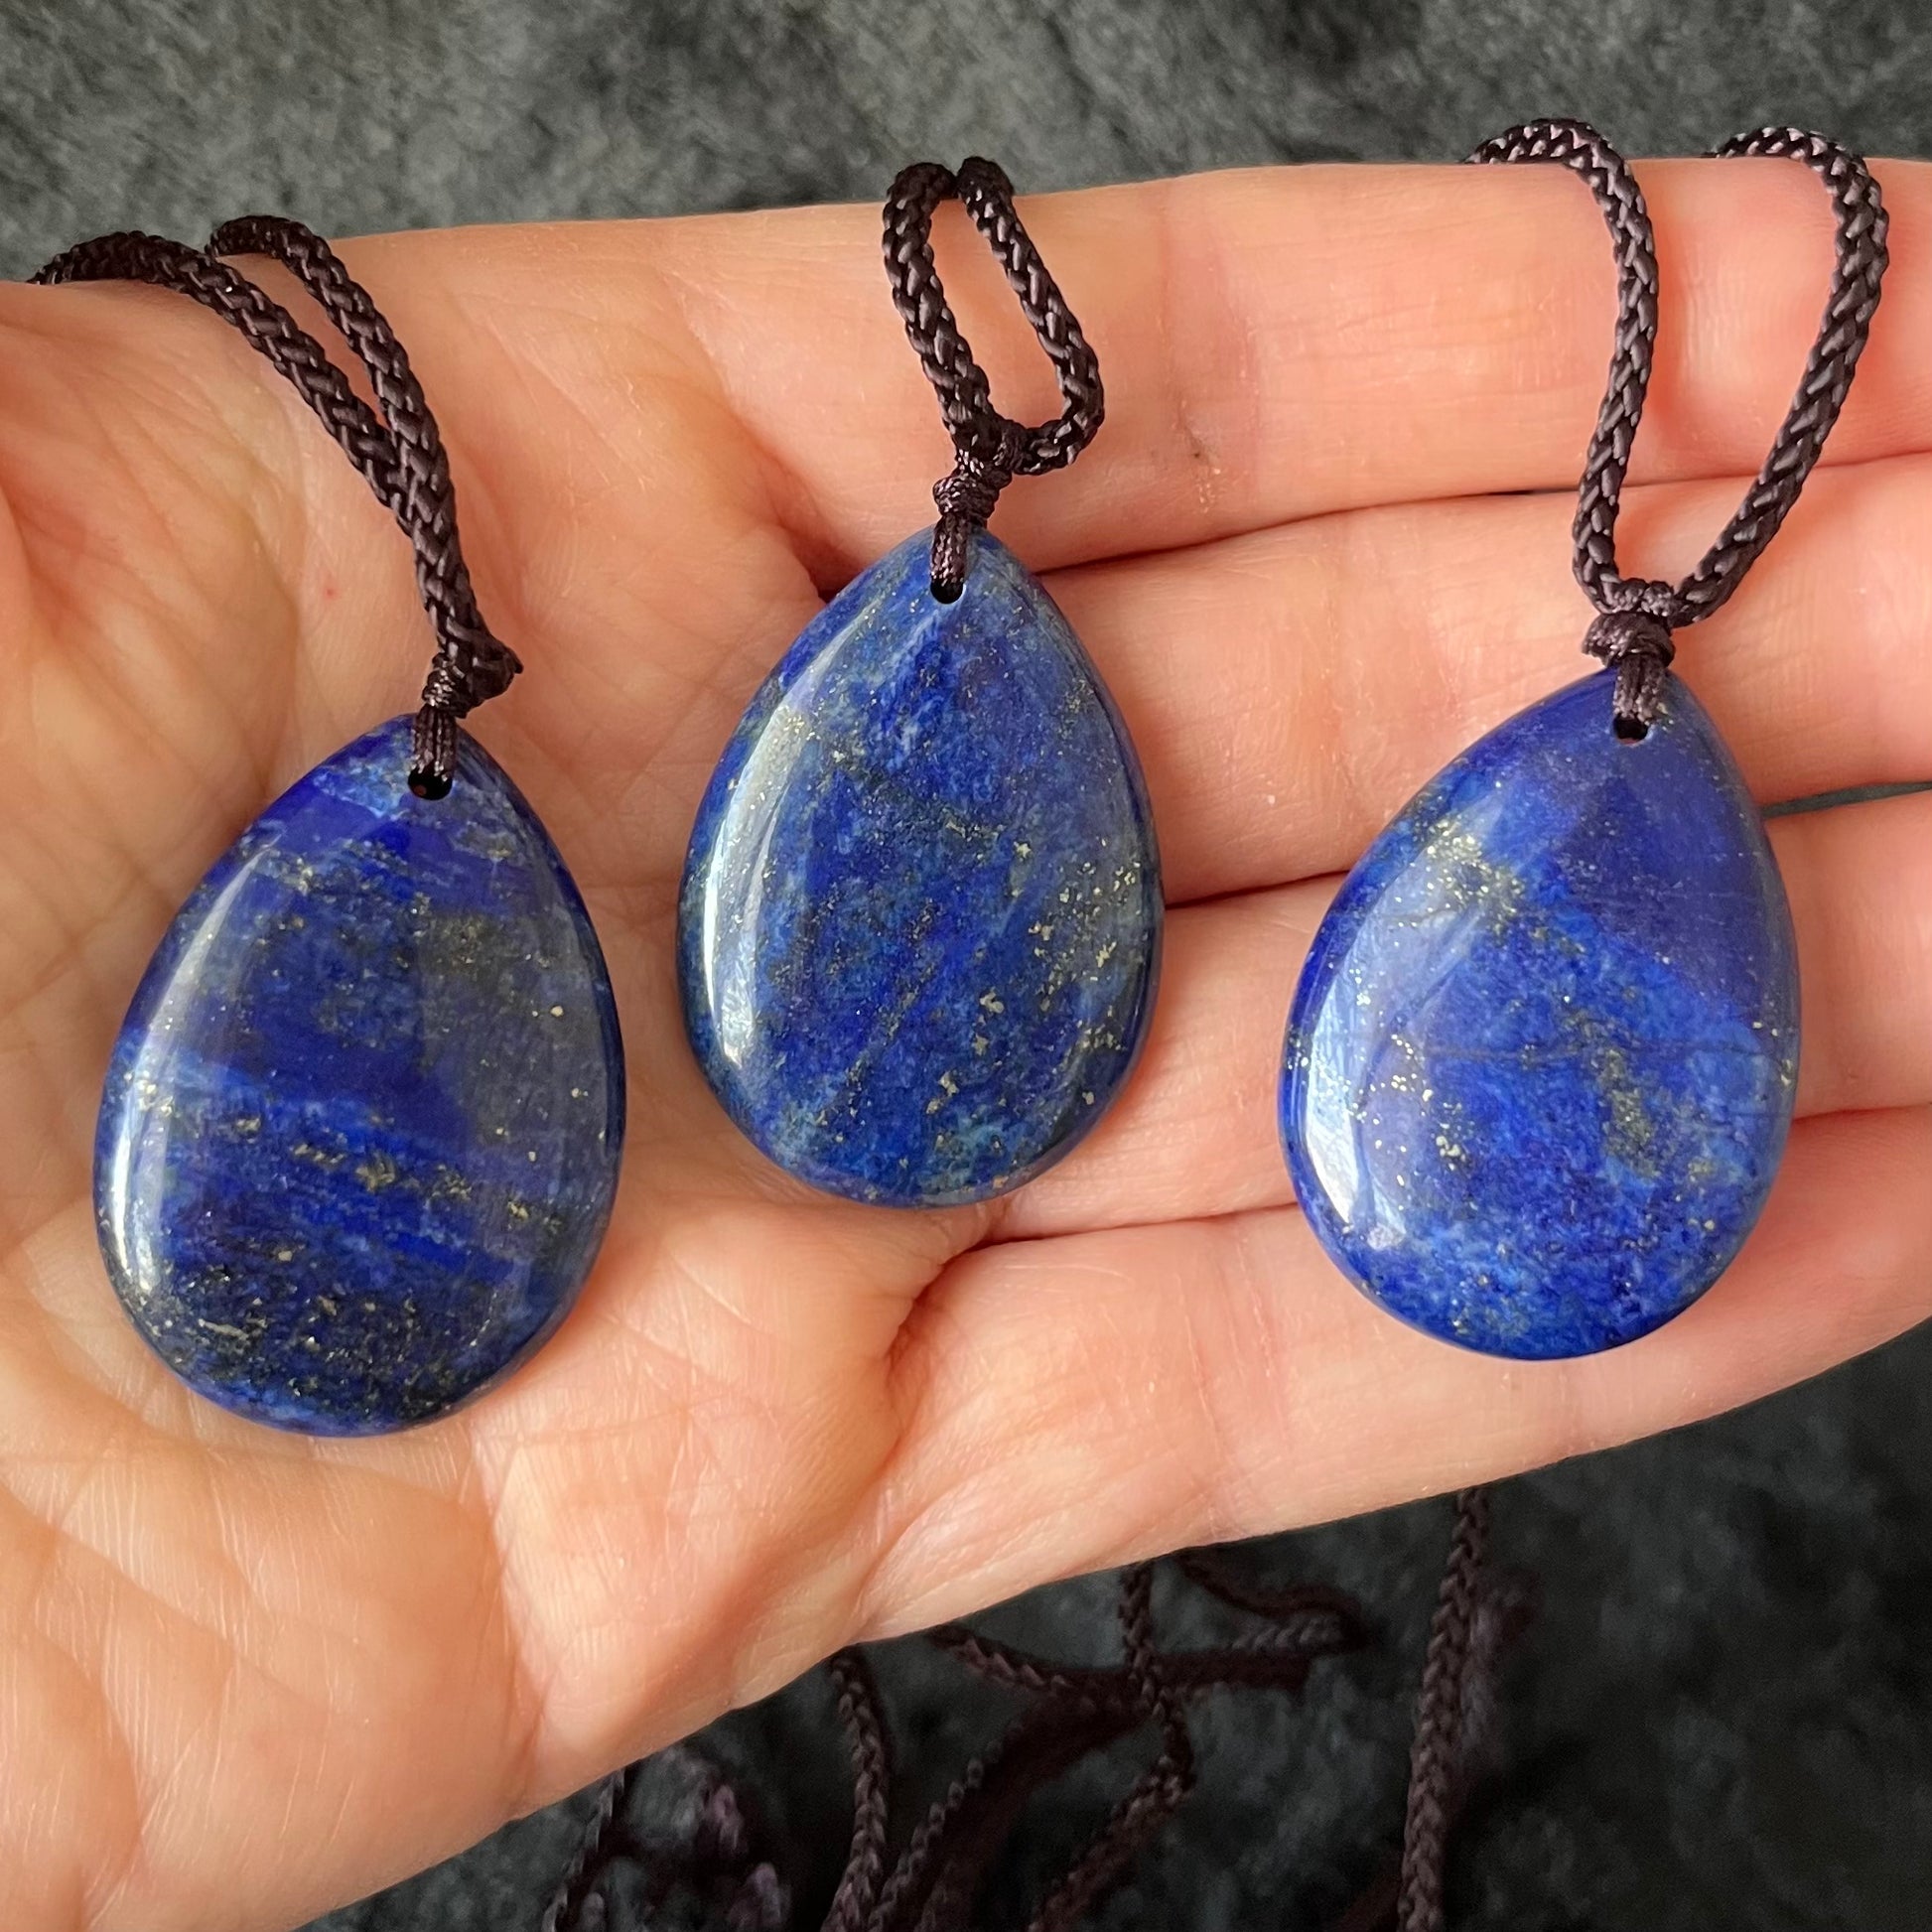 3 Exquisite lapis lazuli tear drop pendant necklaces, featuring deep blue gemstones suspended delicately from adjustable cords, adding elegance to any ensemble."